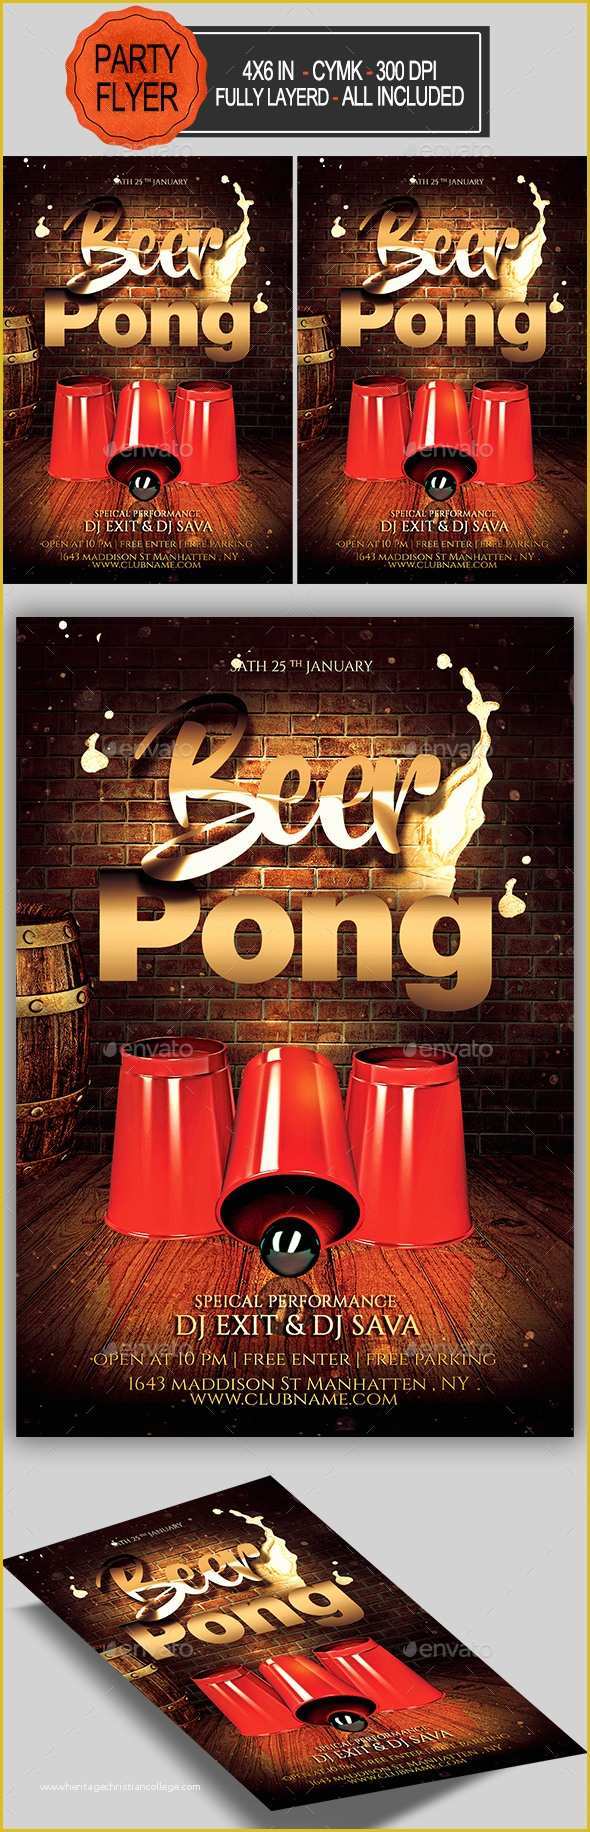 Free Beer Pong Flyer Template Of Beer Pong Flyer Template Dondrup